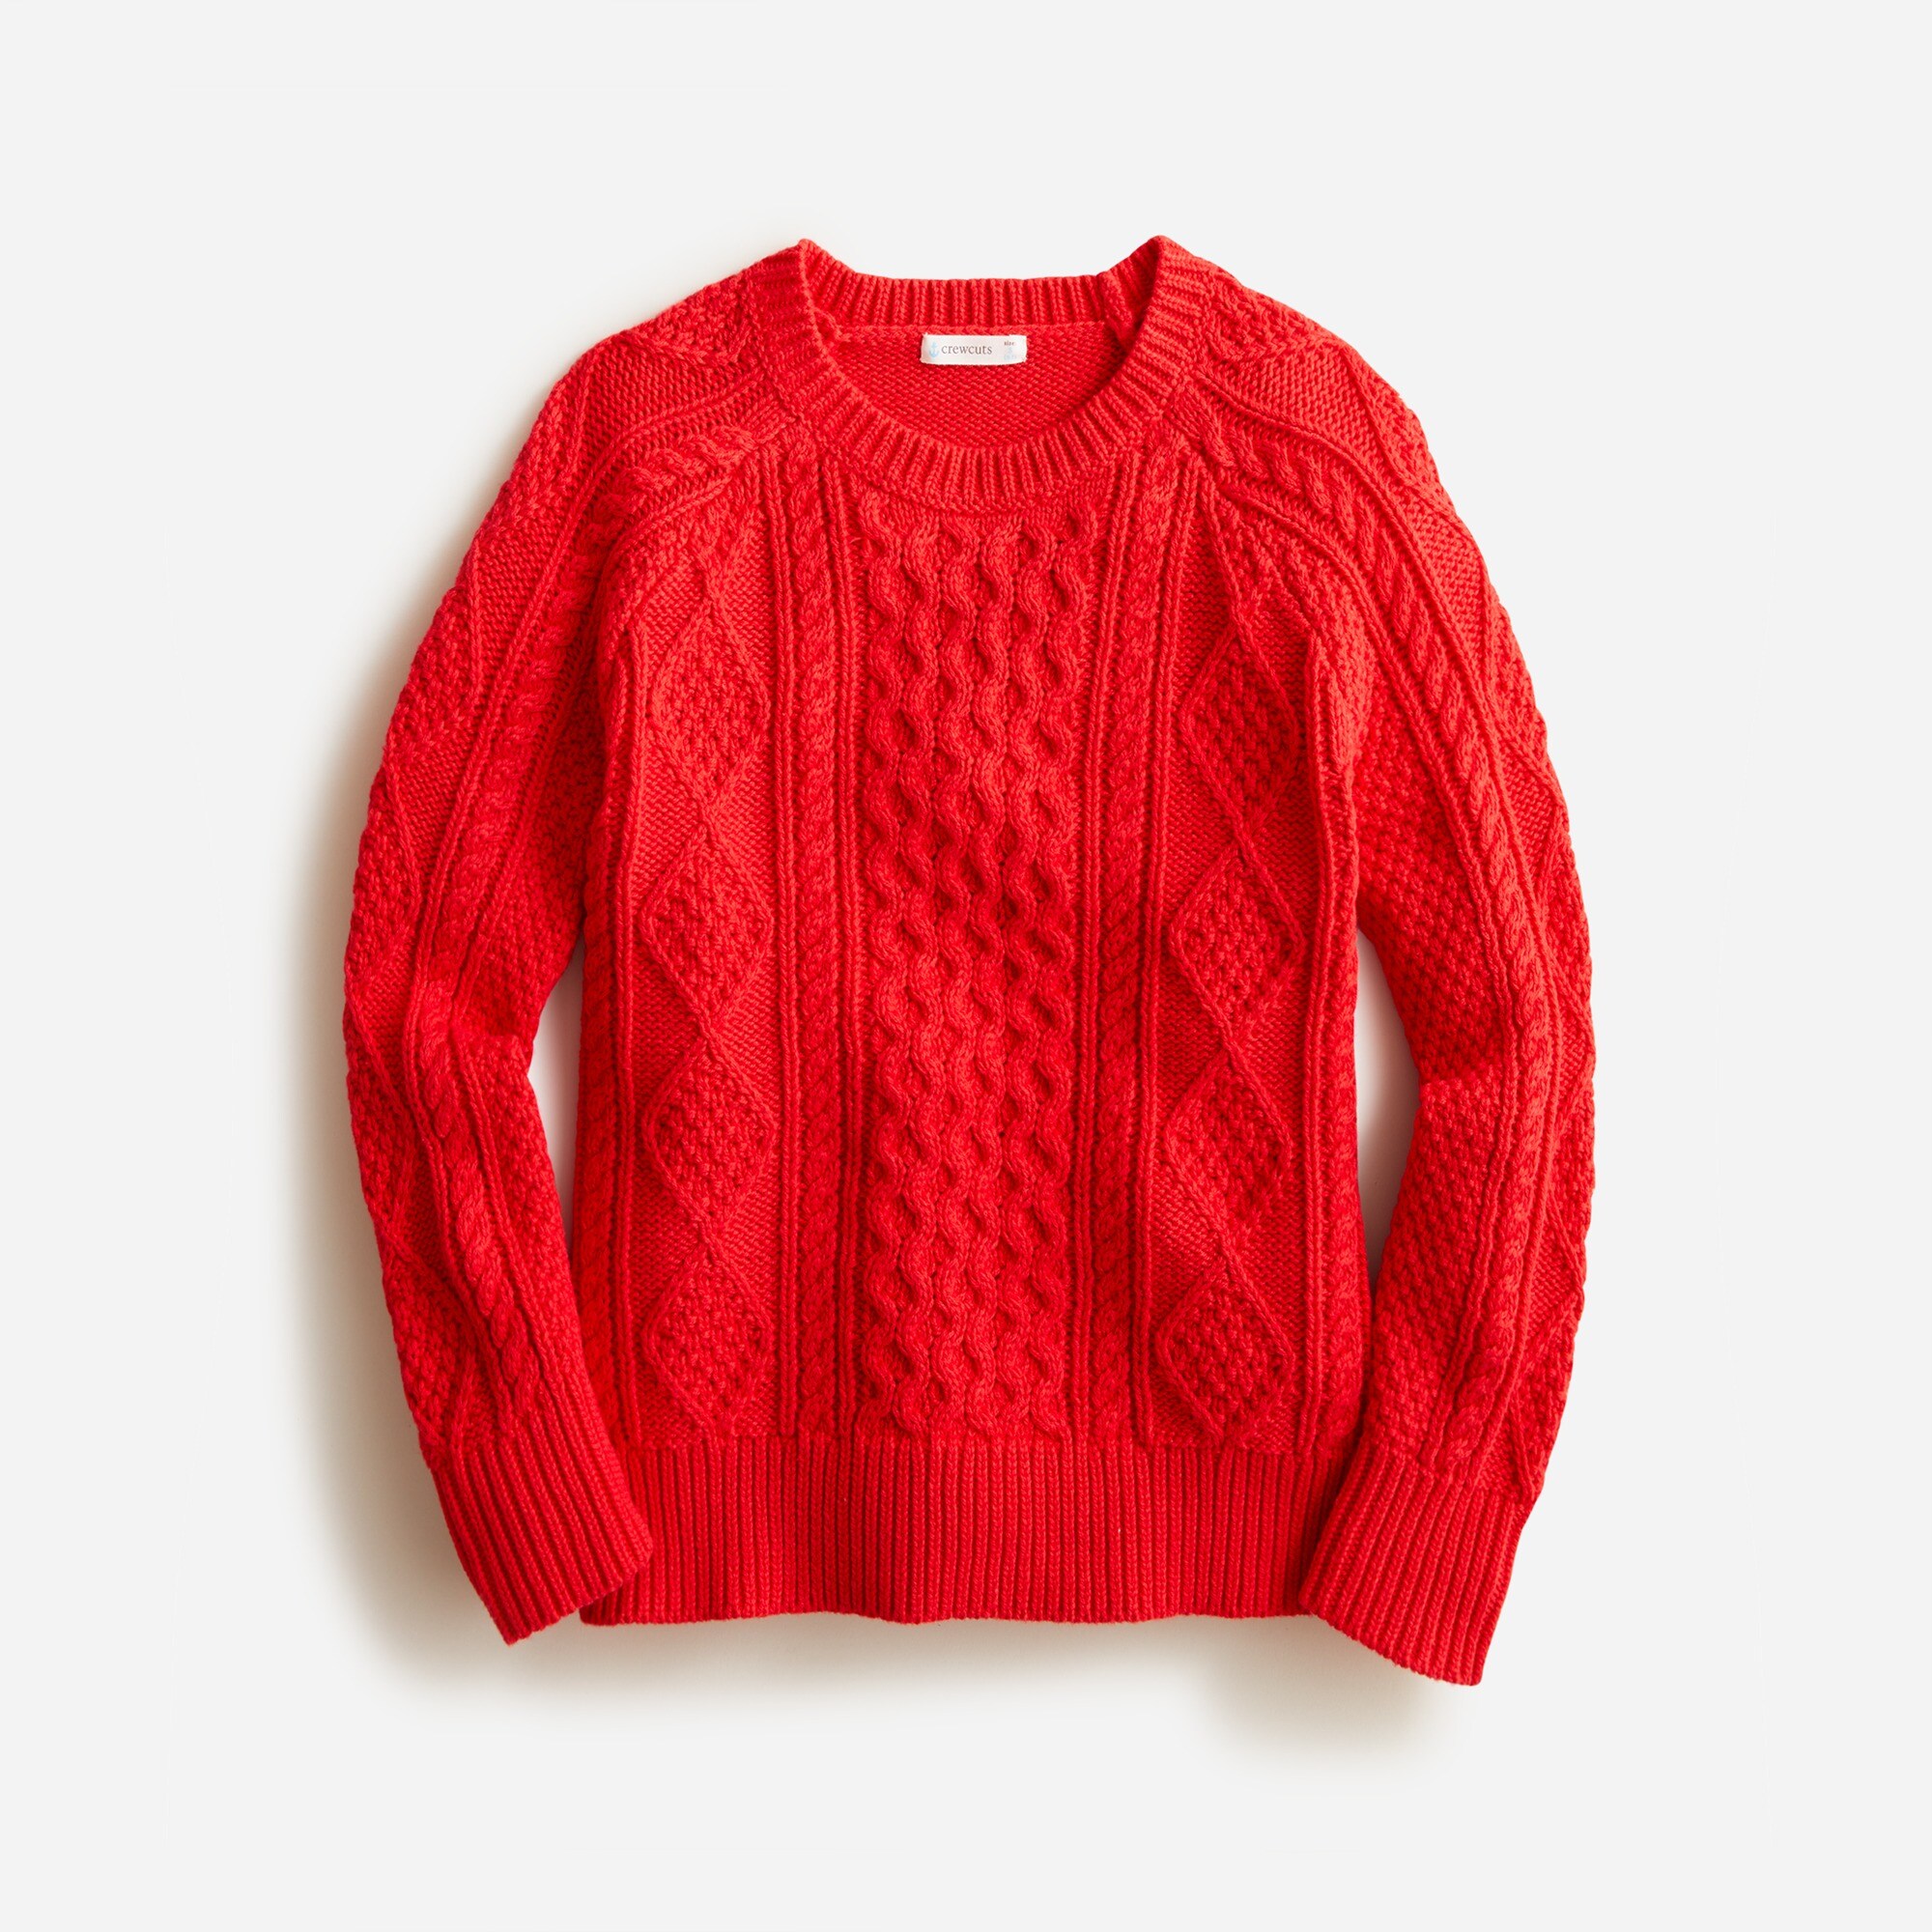  Kids' cable-knit fisherman sweater